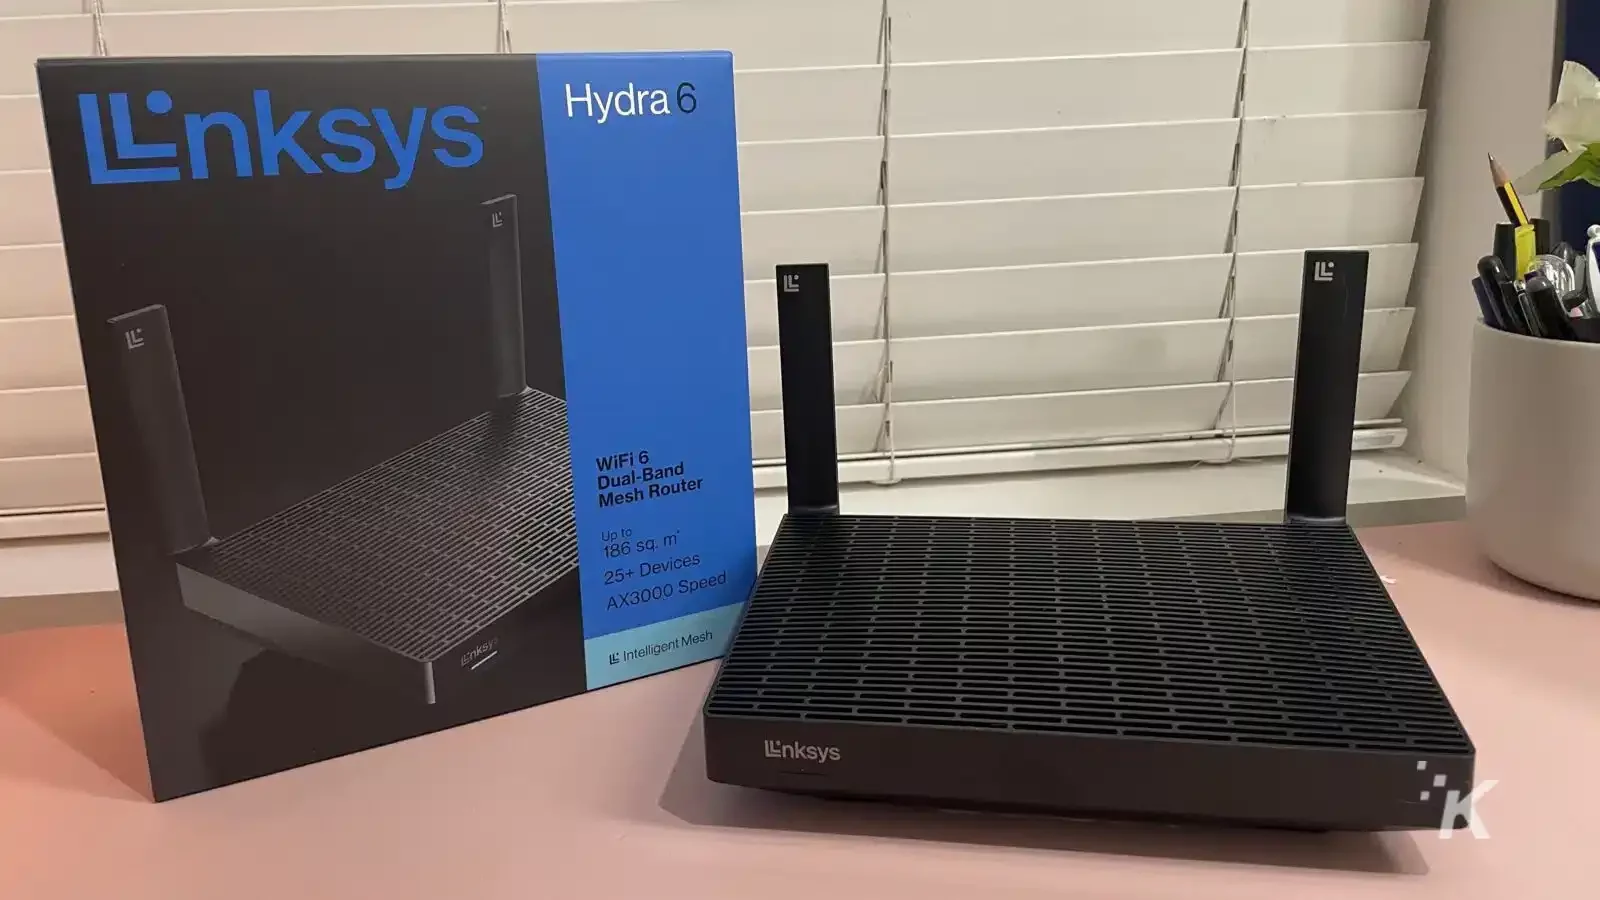 Linksys Hydra6 router next to box